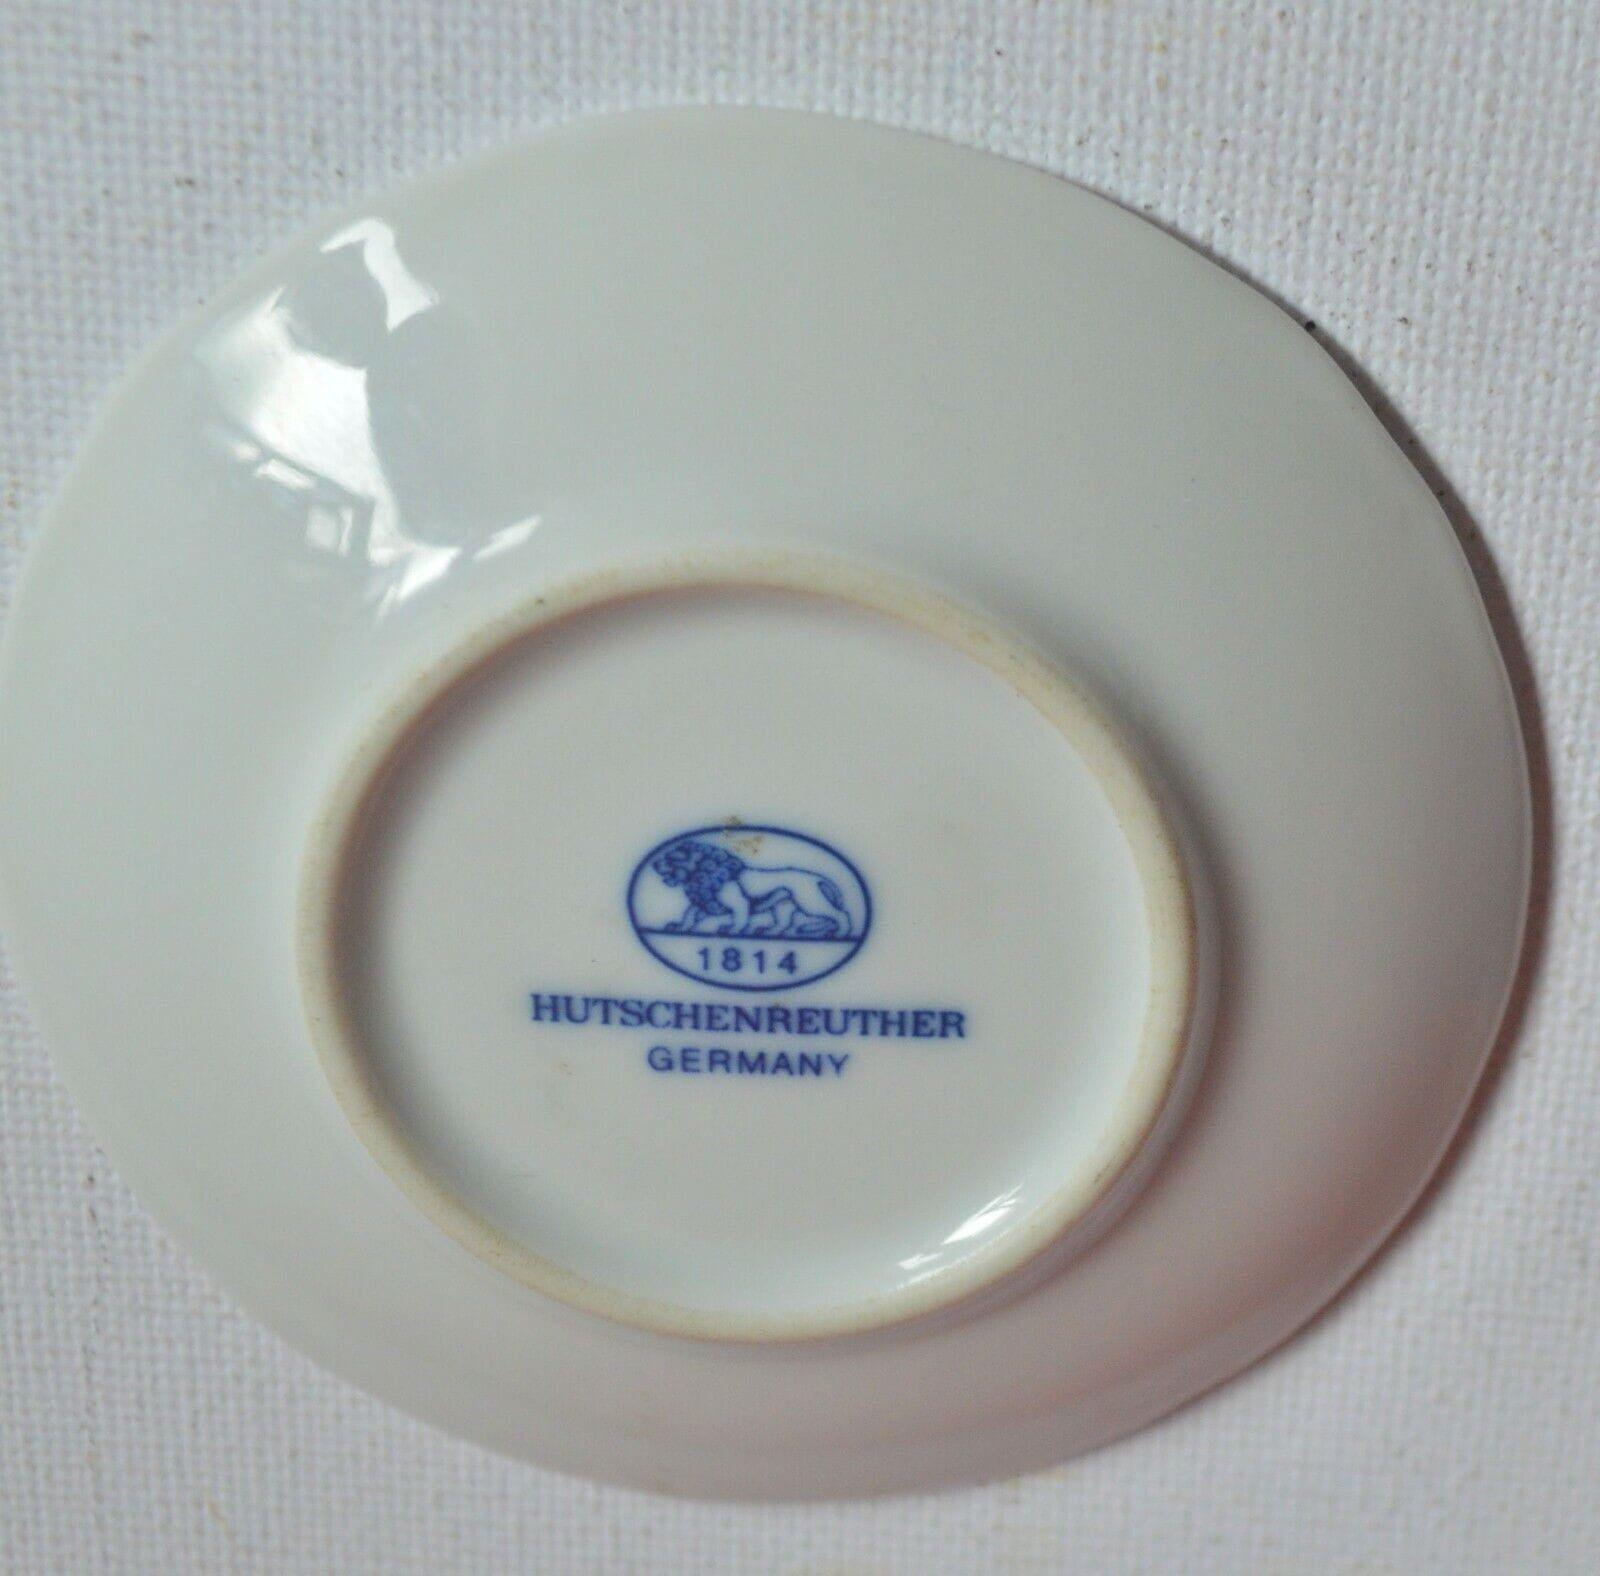 HUTSCHENREUTHER MINIATURE PLATE DEPICTING A BLUE FLORAL PATTERN - TMD167207